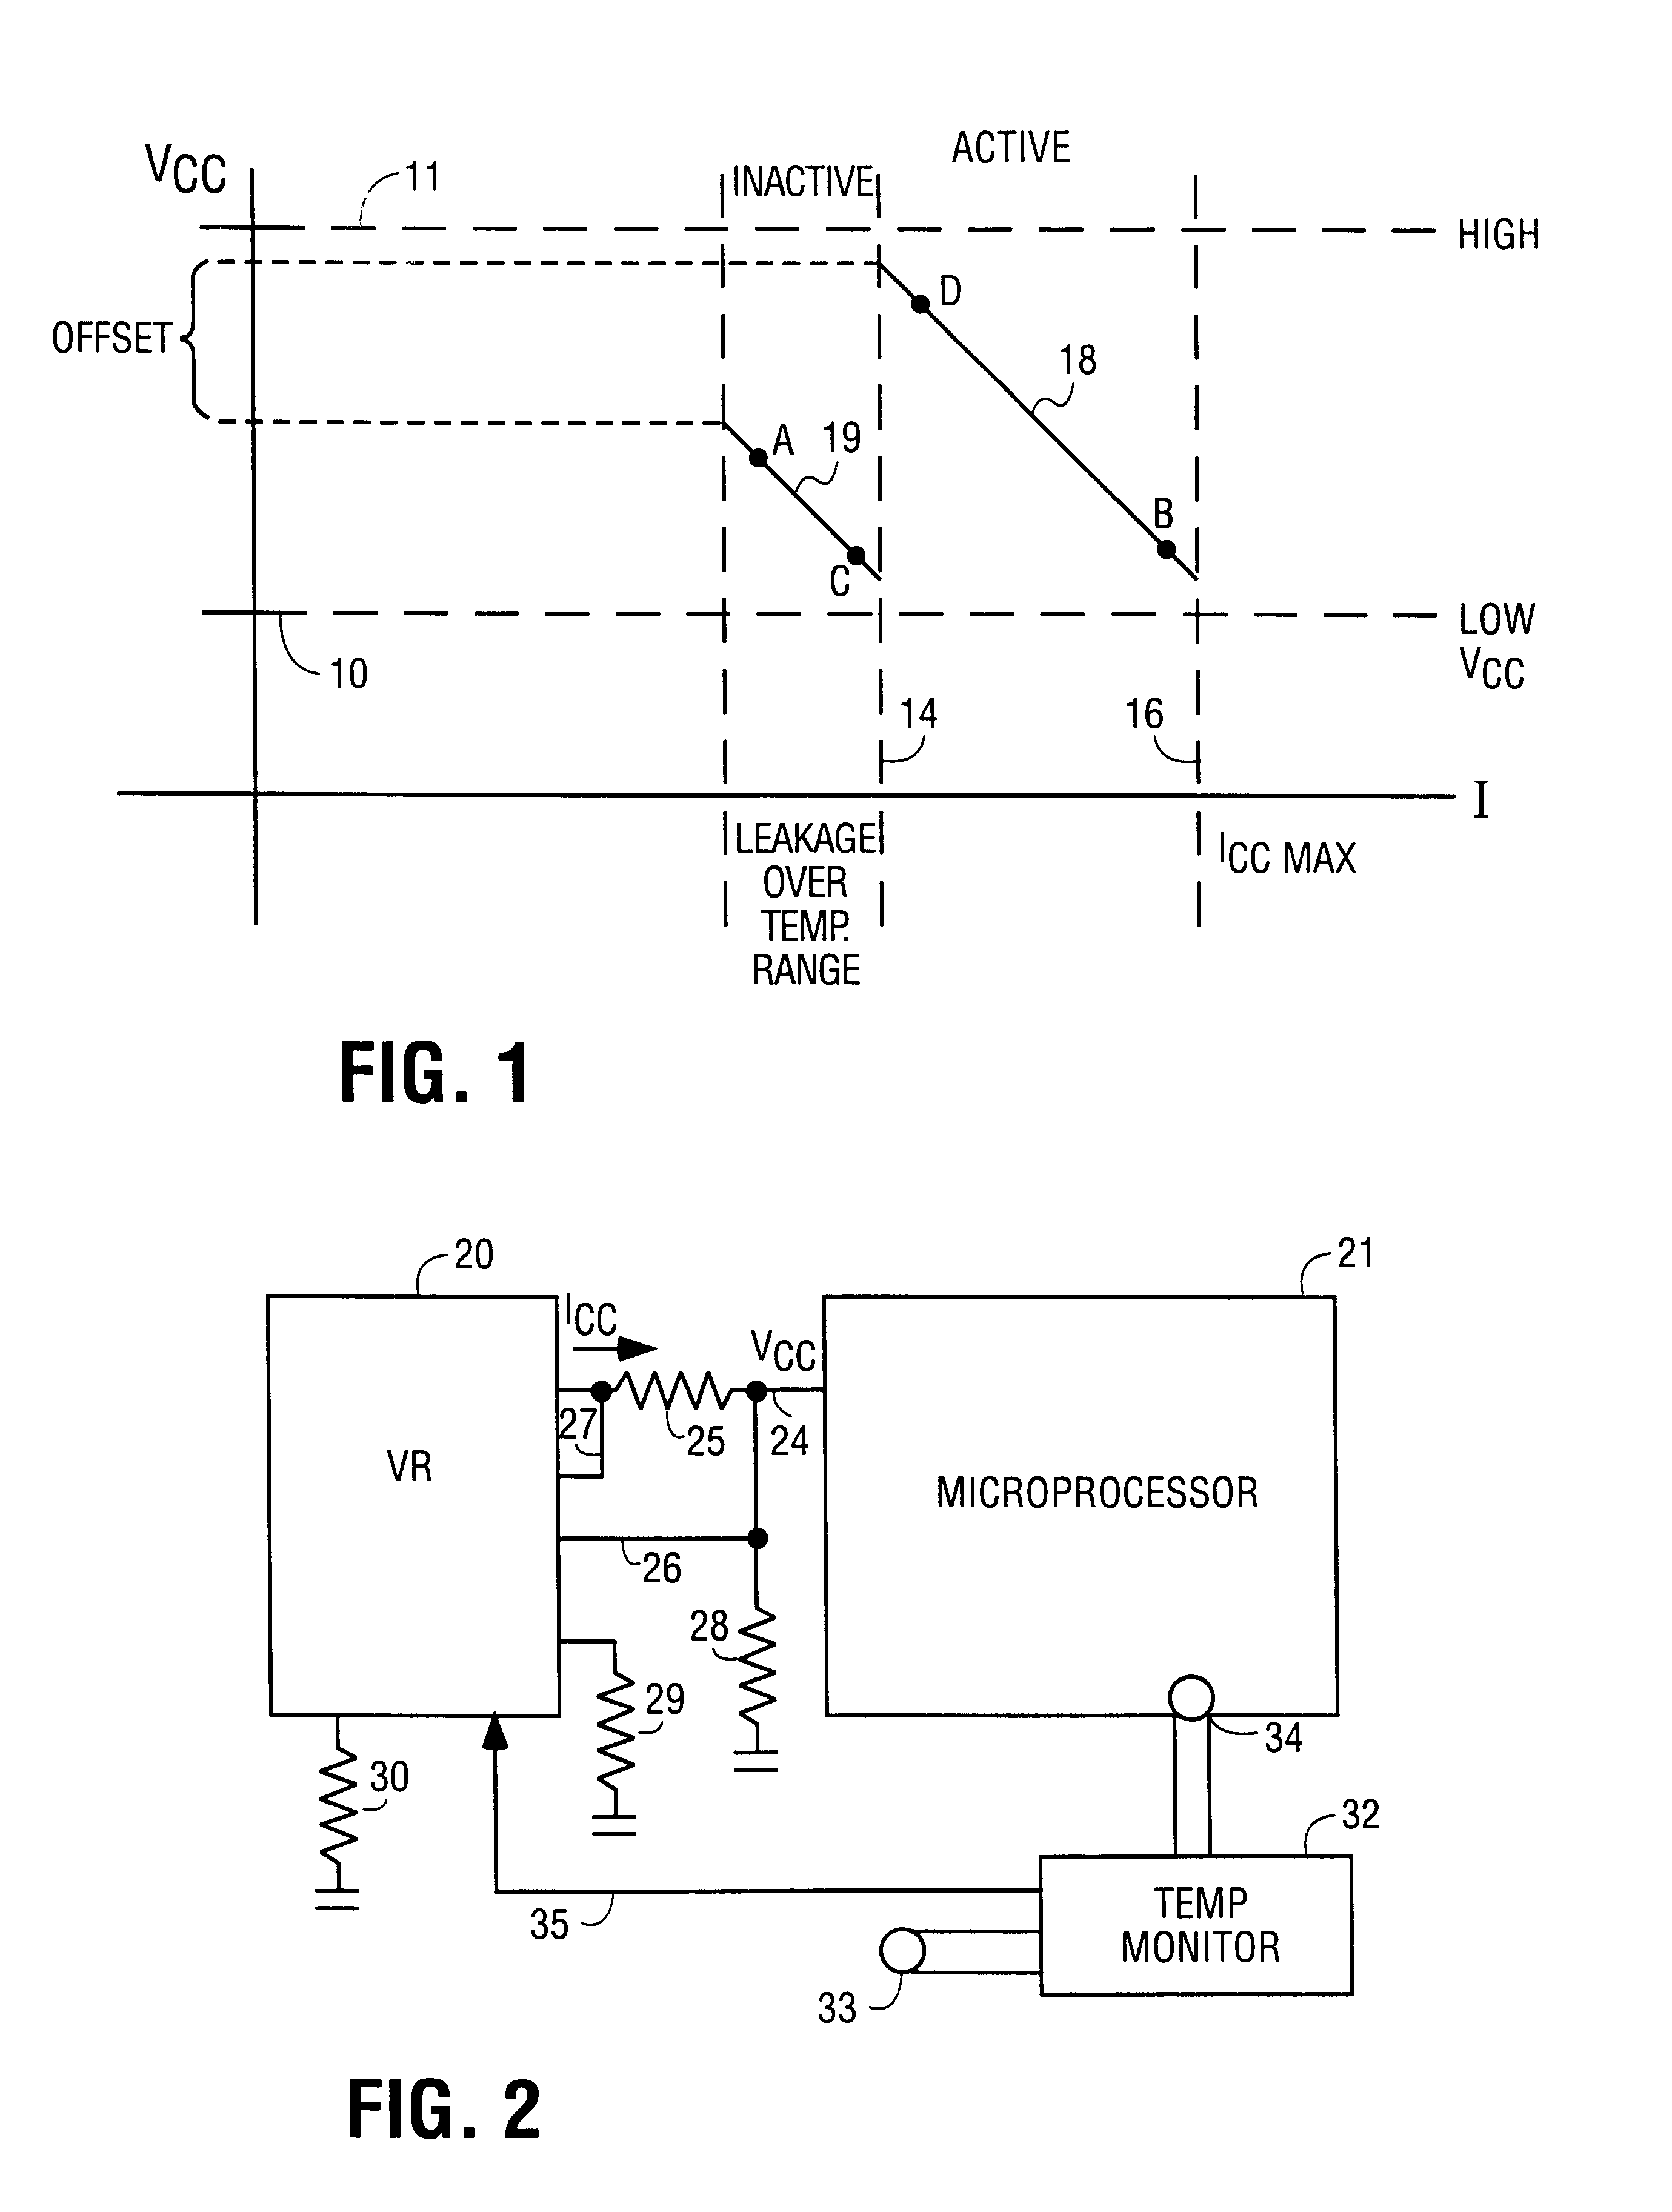 Auto-calibrating voltage regulator with dynamic set-point capability